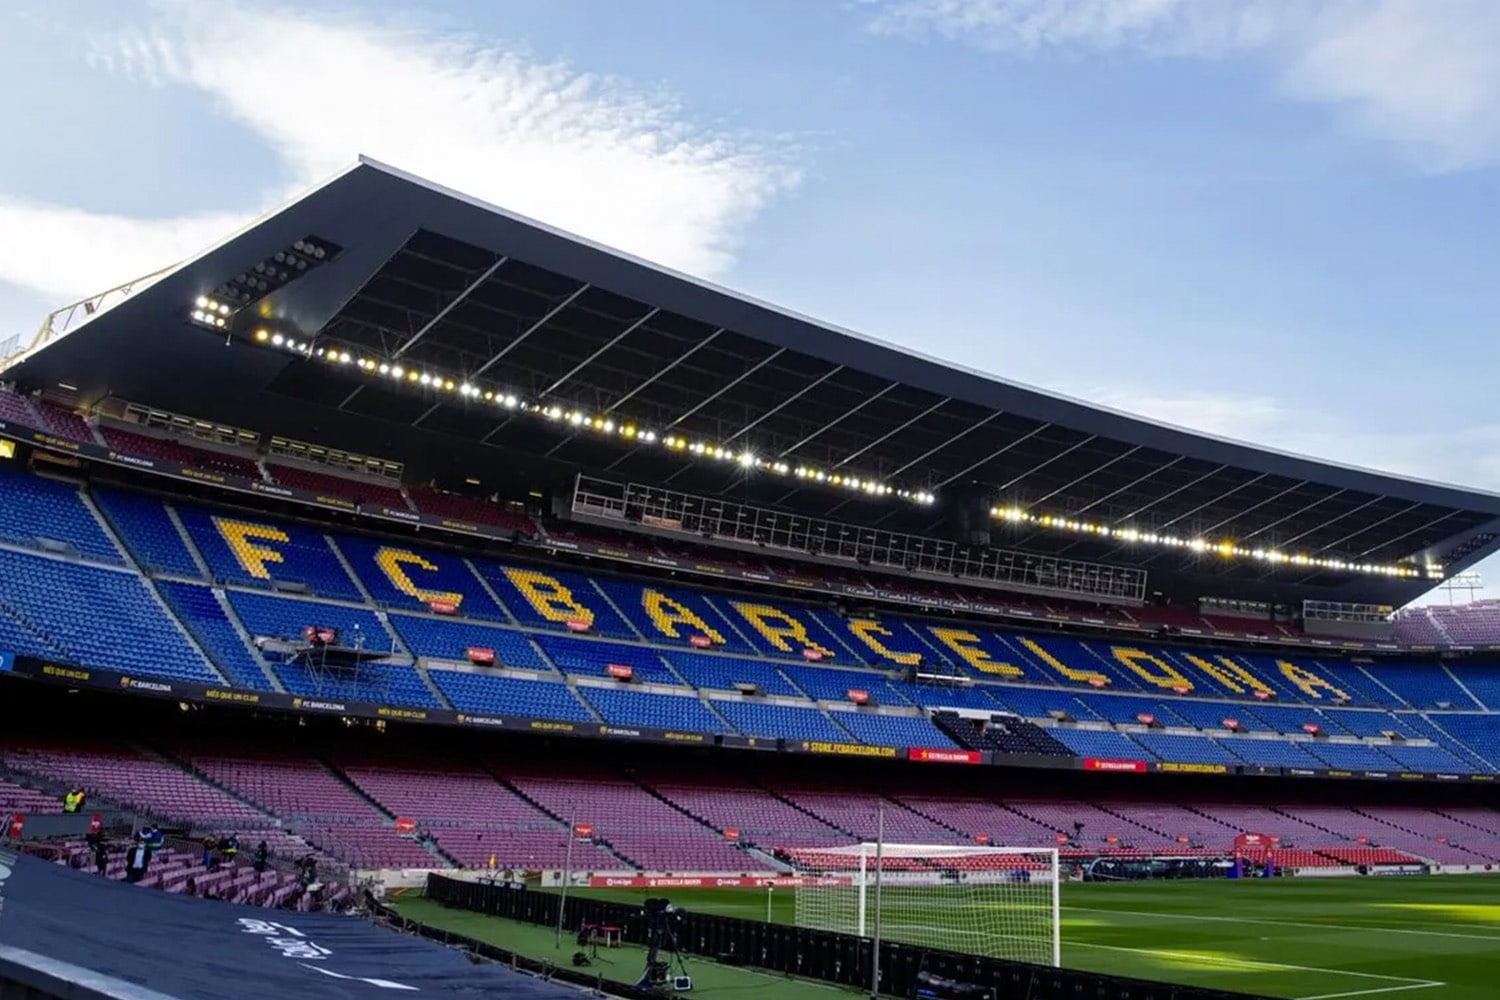 A view of the FC Barcelona stadium